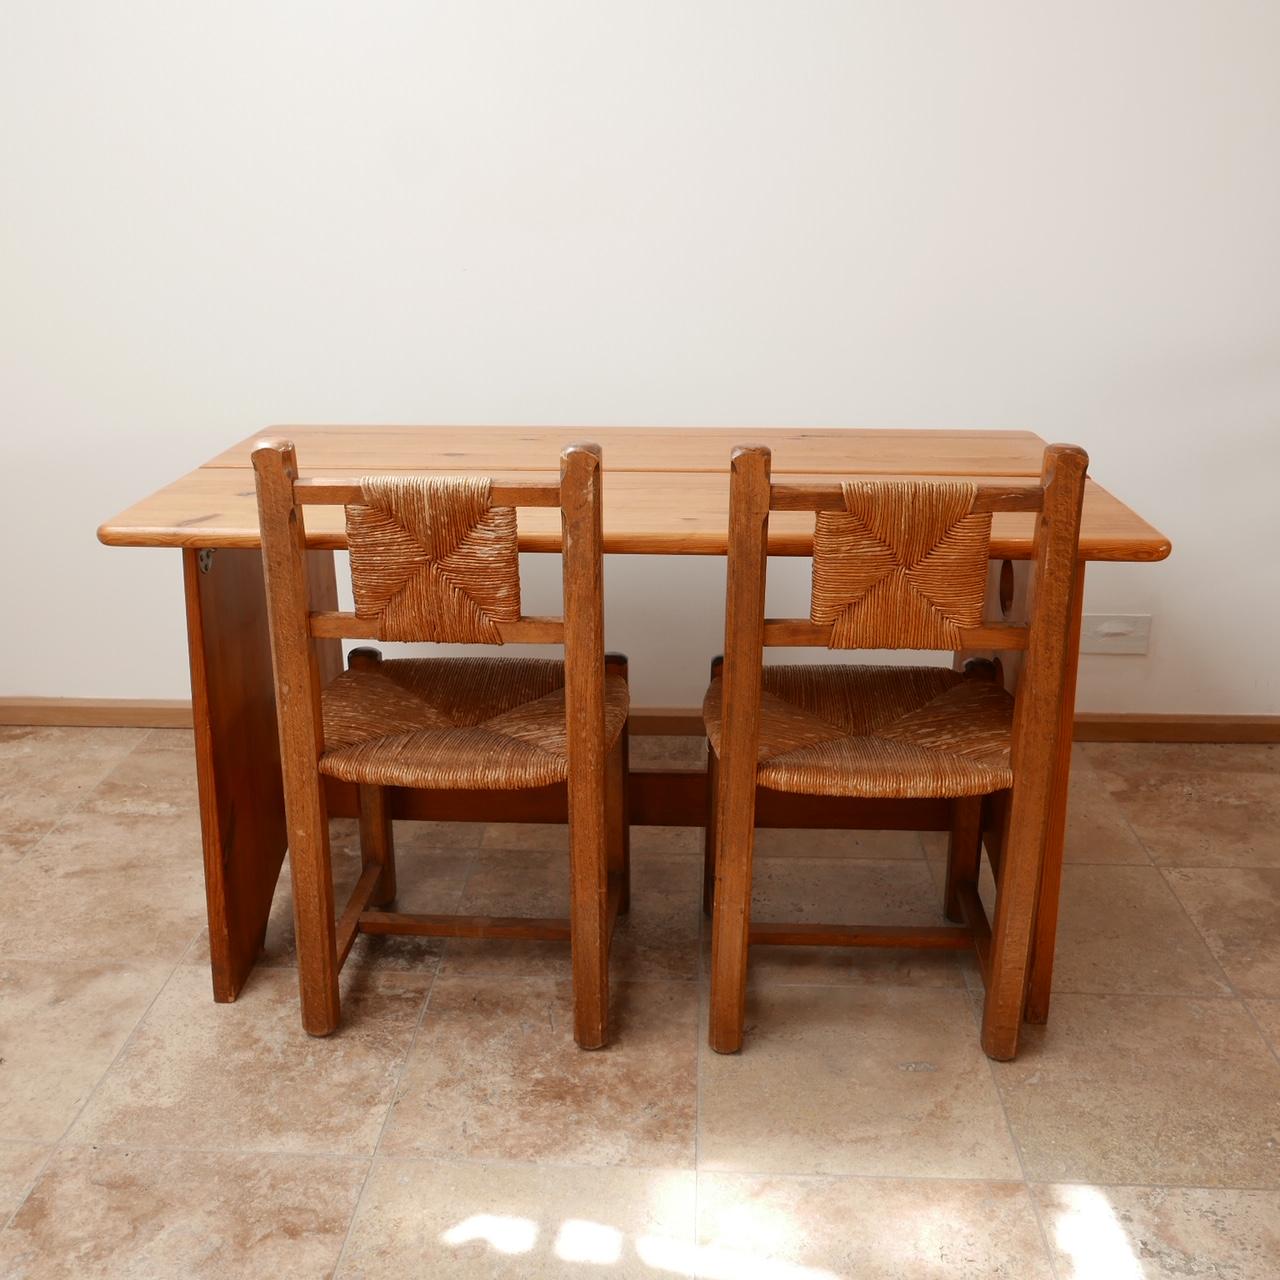 A dining table by Gilbert Marklund.

Pine, Sweden, circa 1970s.

Made for Furusnickarn AB.

Scarce and wildly stylish.

Dimensions: 140 W x 78 D x 72 H in cm.